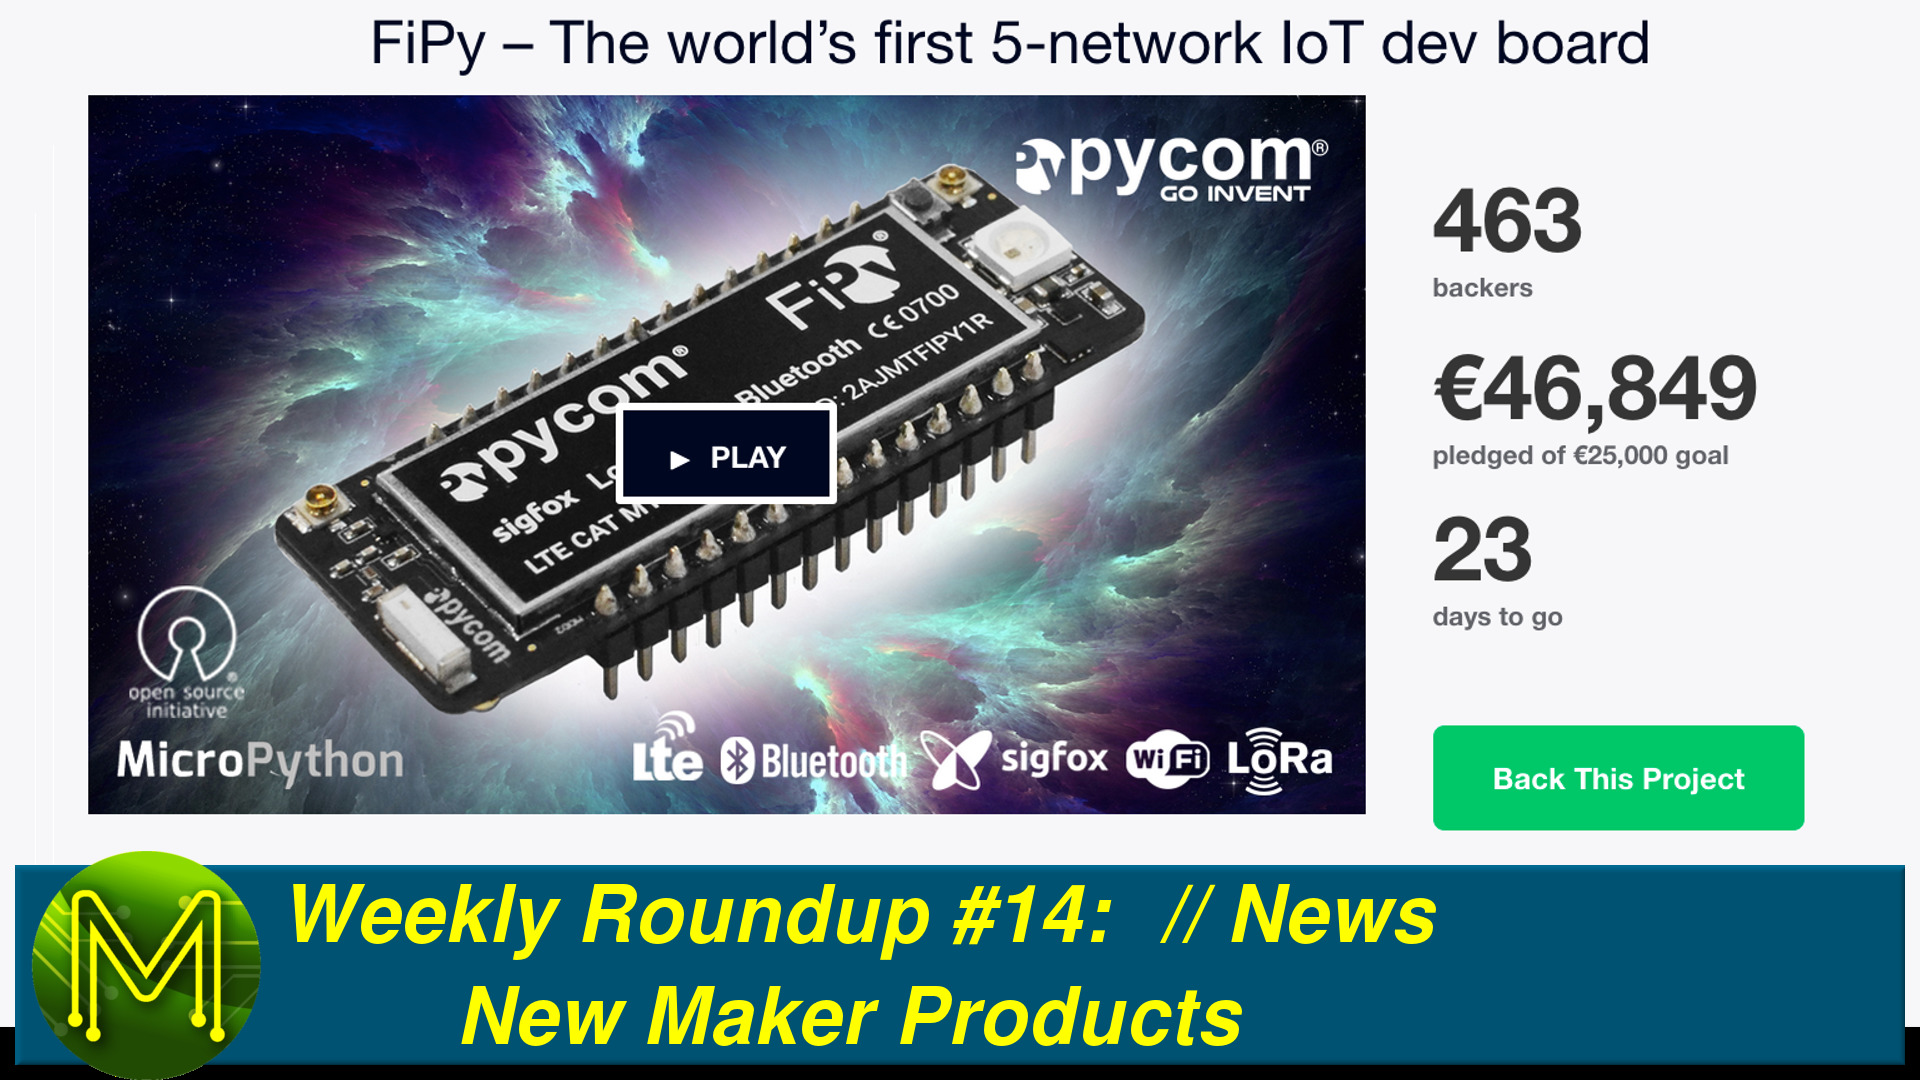 Weekly Roundup #14 - New Maker Products // News